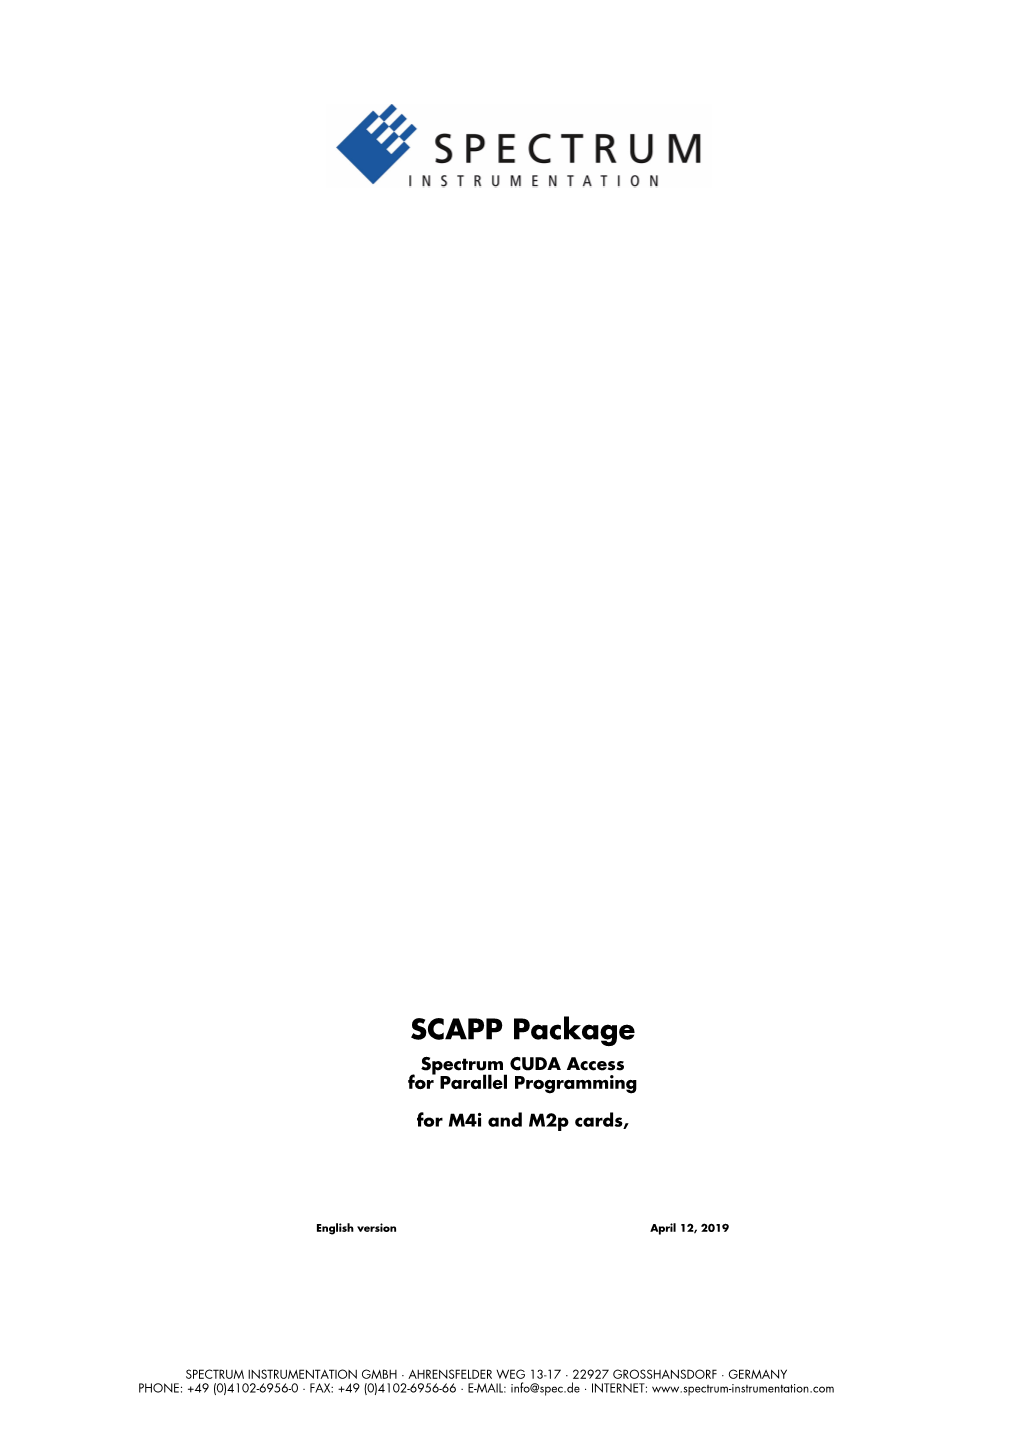 SCAPP Package Spectrum CUDA Access for Parallel Programming